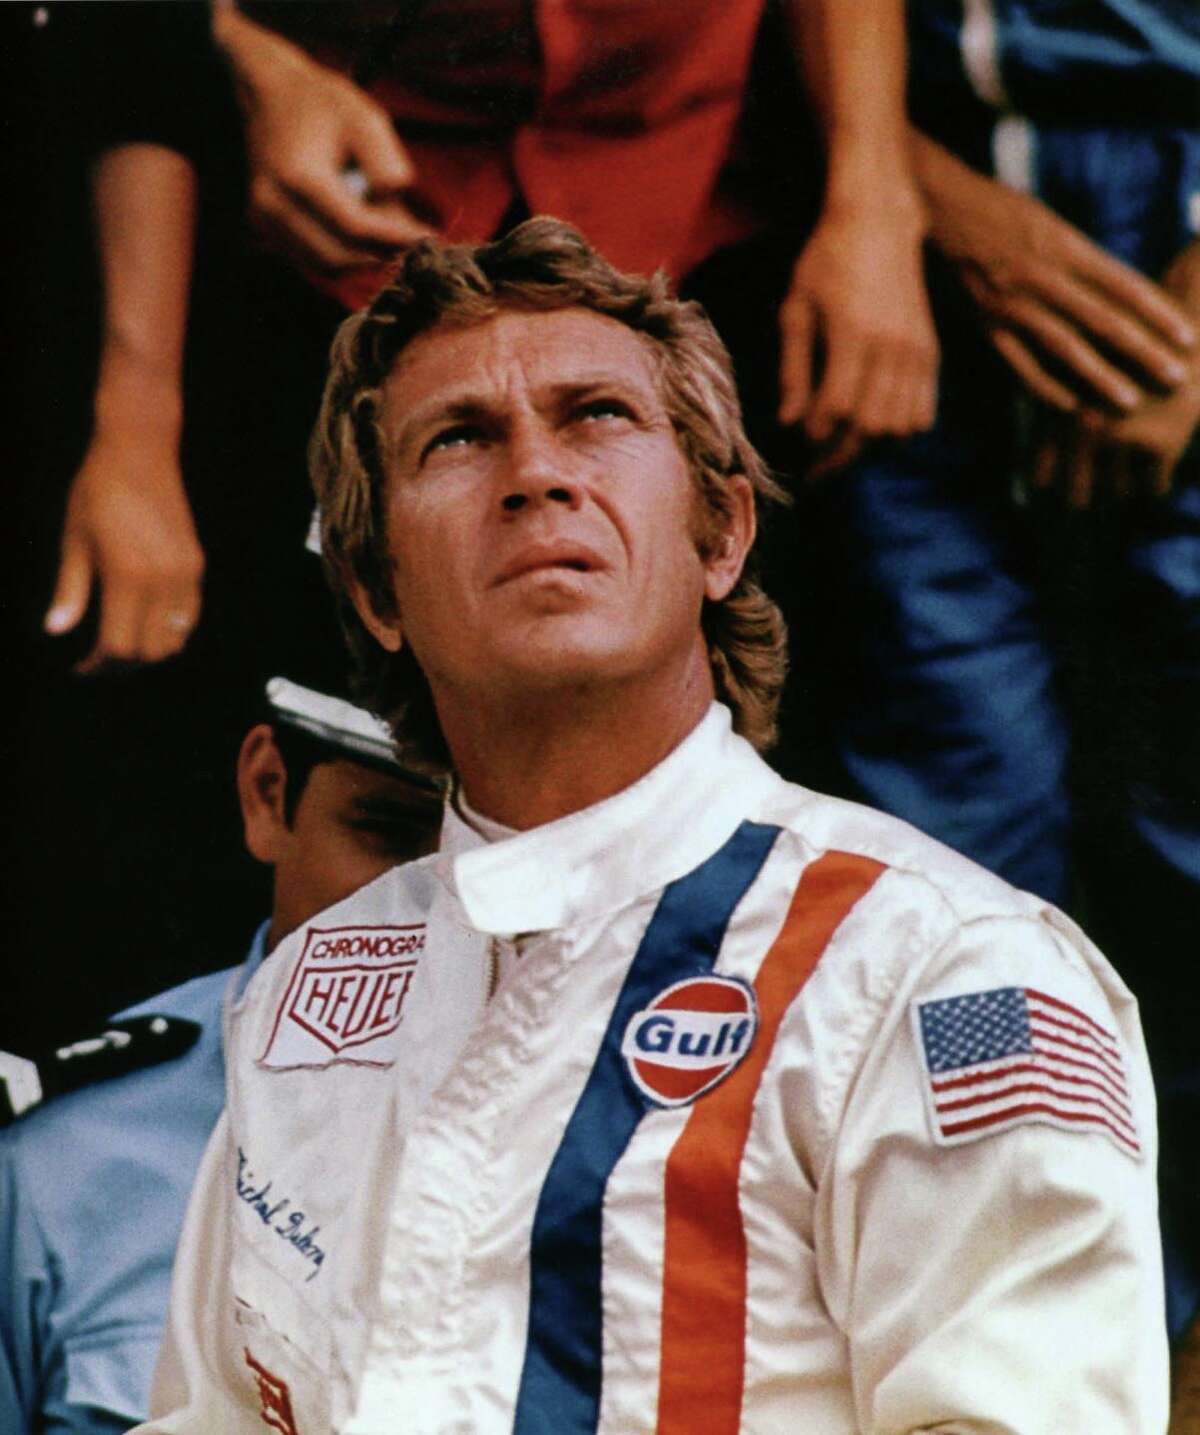 Steve McQueen did all of his own driving in the 1971 racing drama "Le Mans," which will be shown at the Ridgefield Playhouse on May 28.